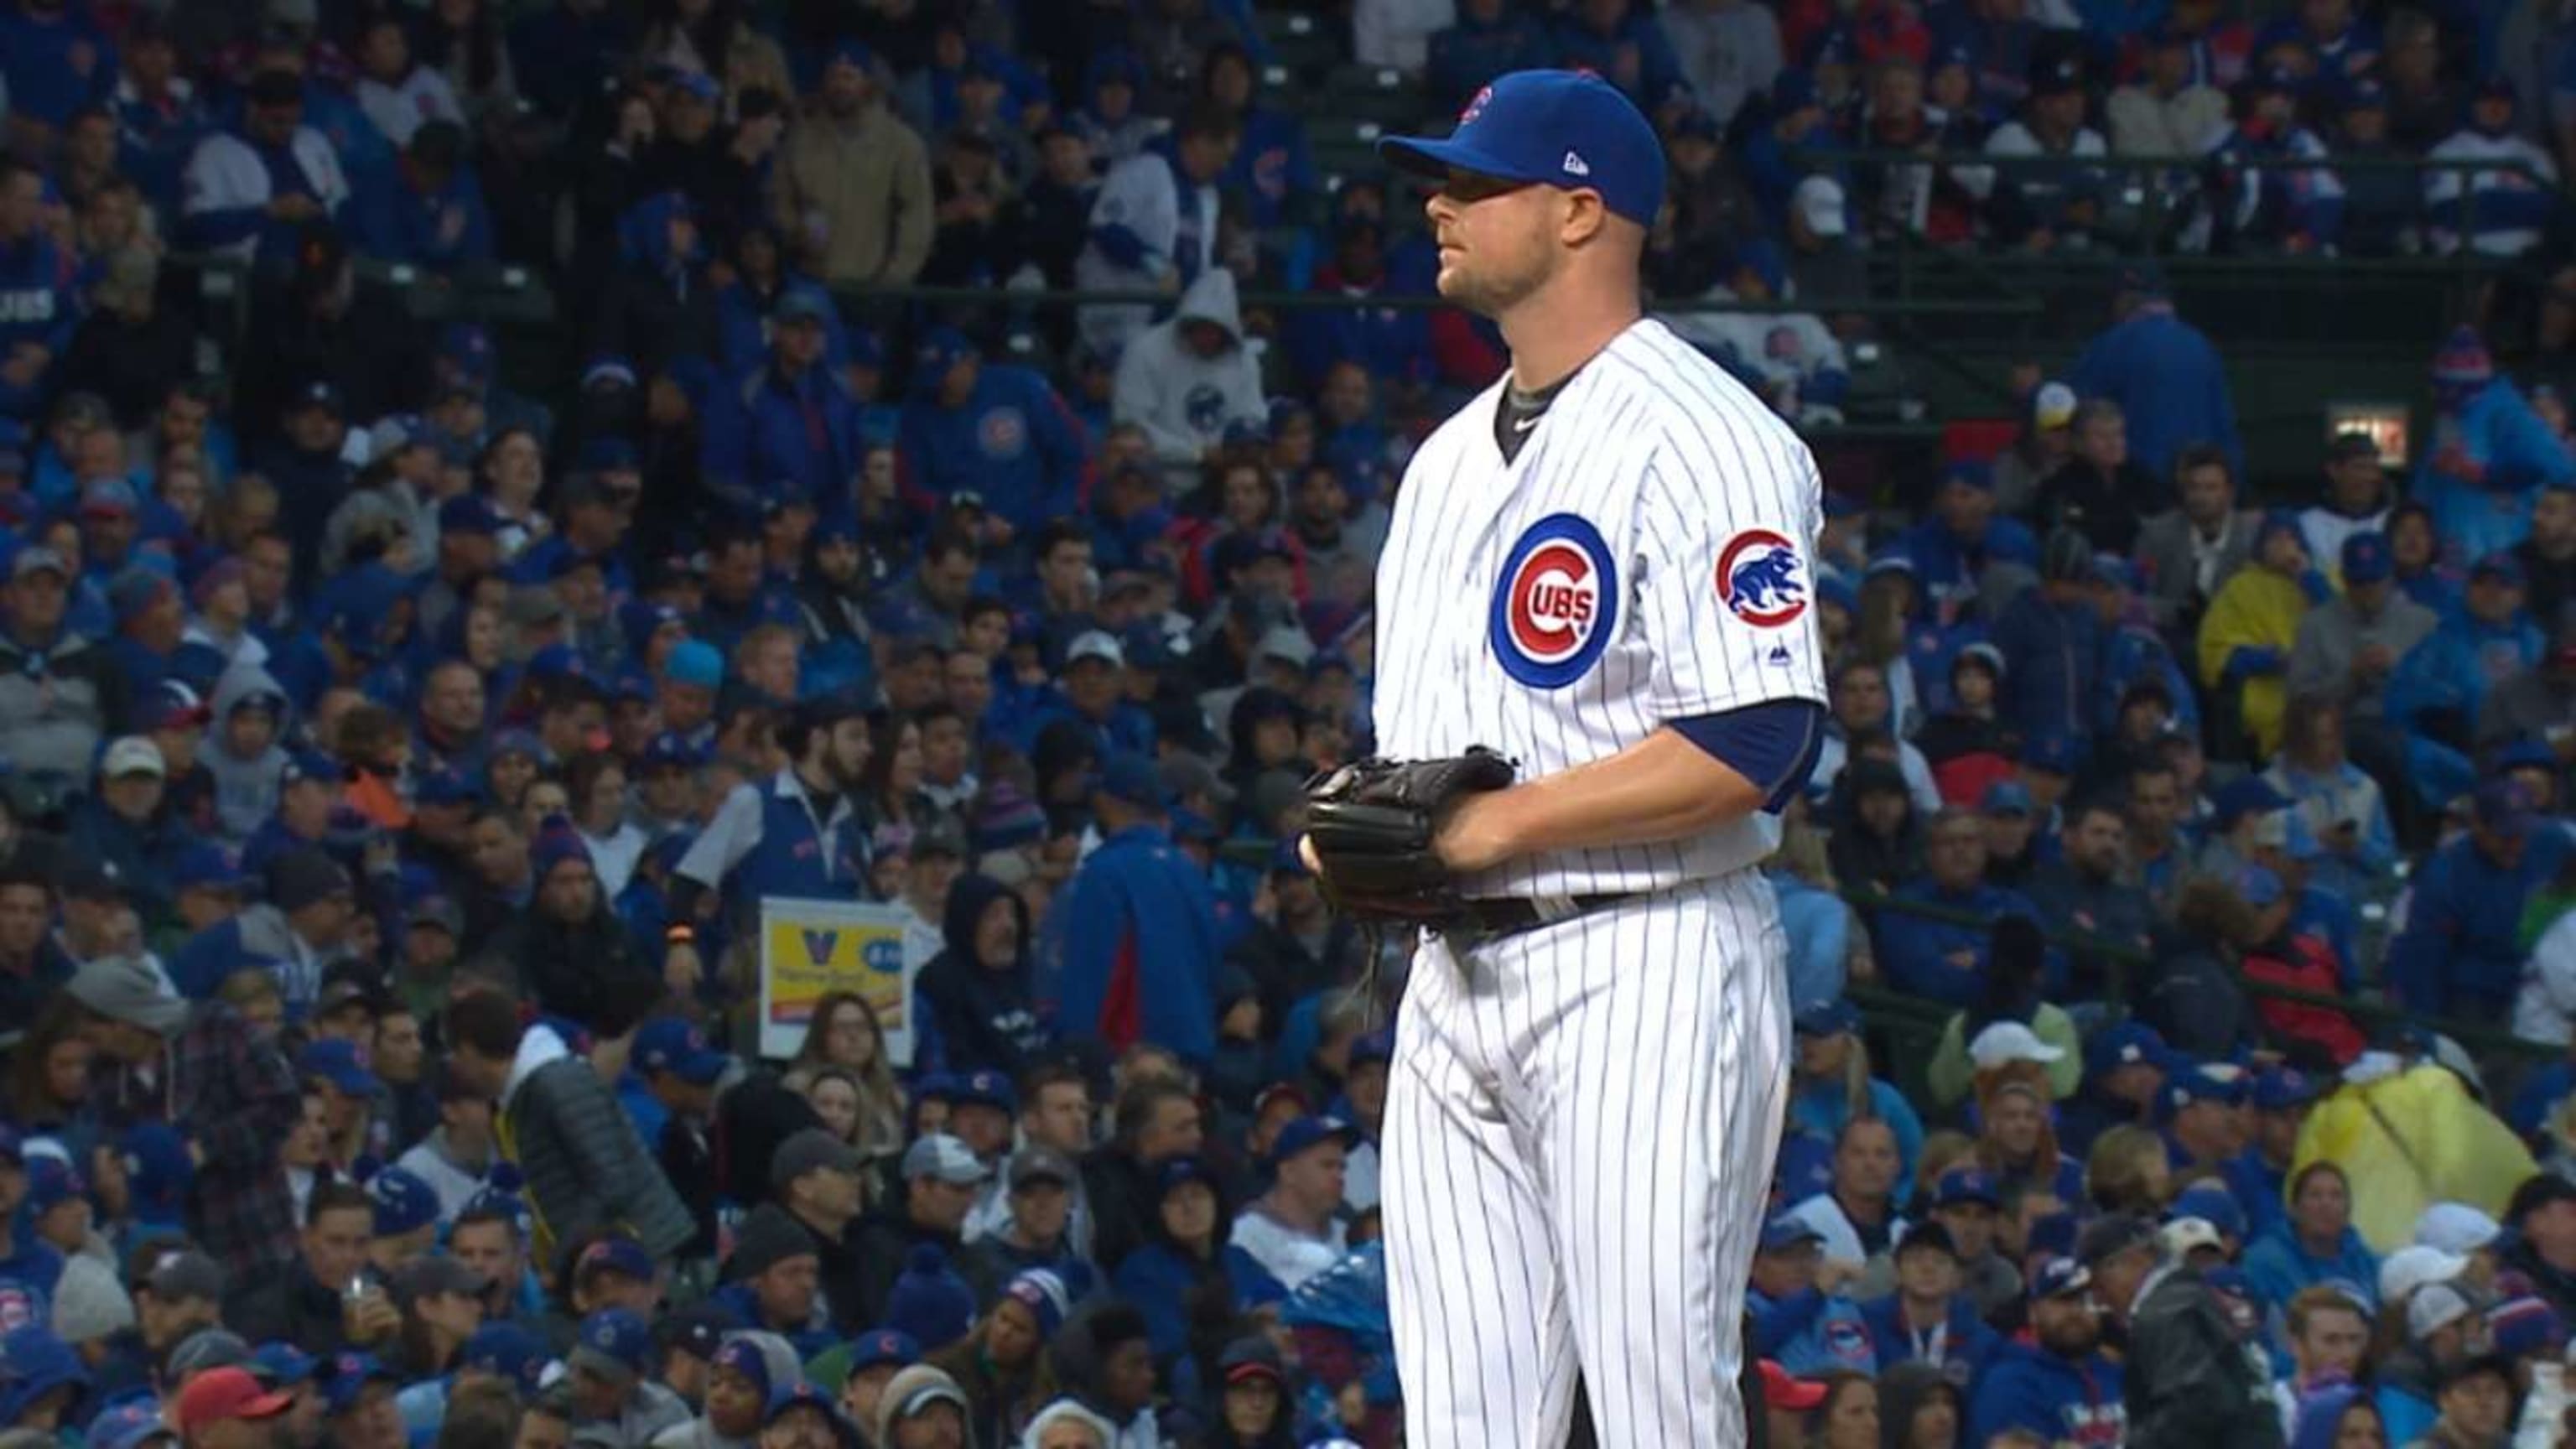 Cubs will play a rare Friday night game at Wrigley Field on September 8th